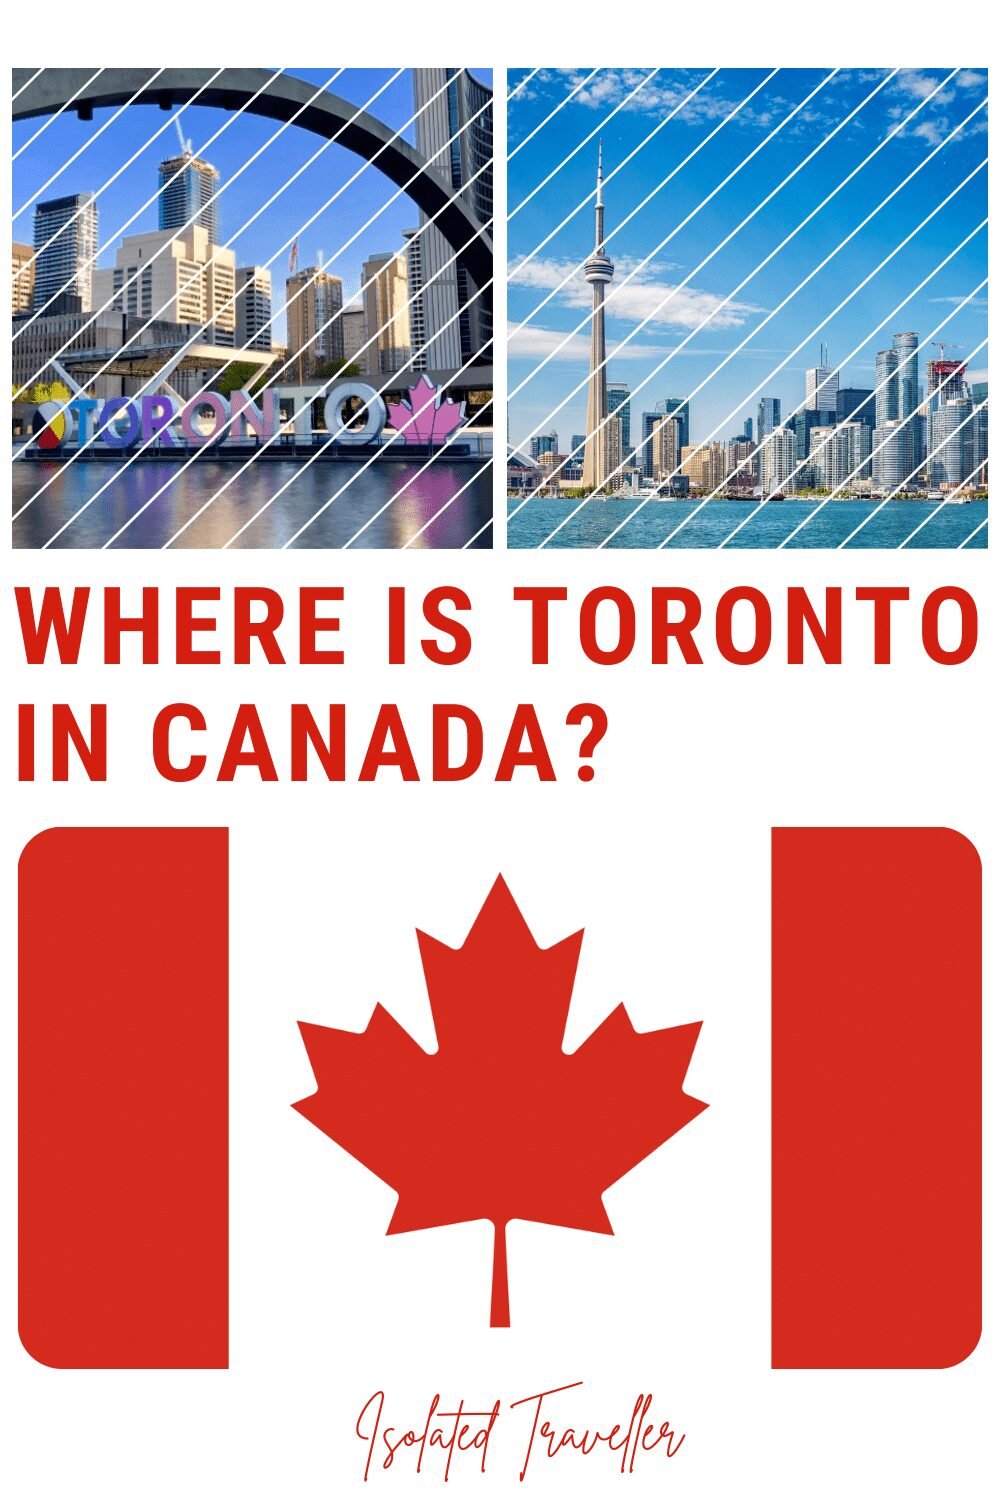 Where is Toronto in Canada?